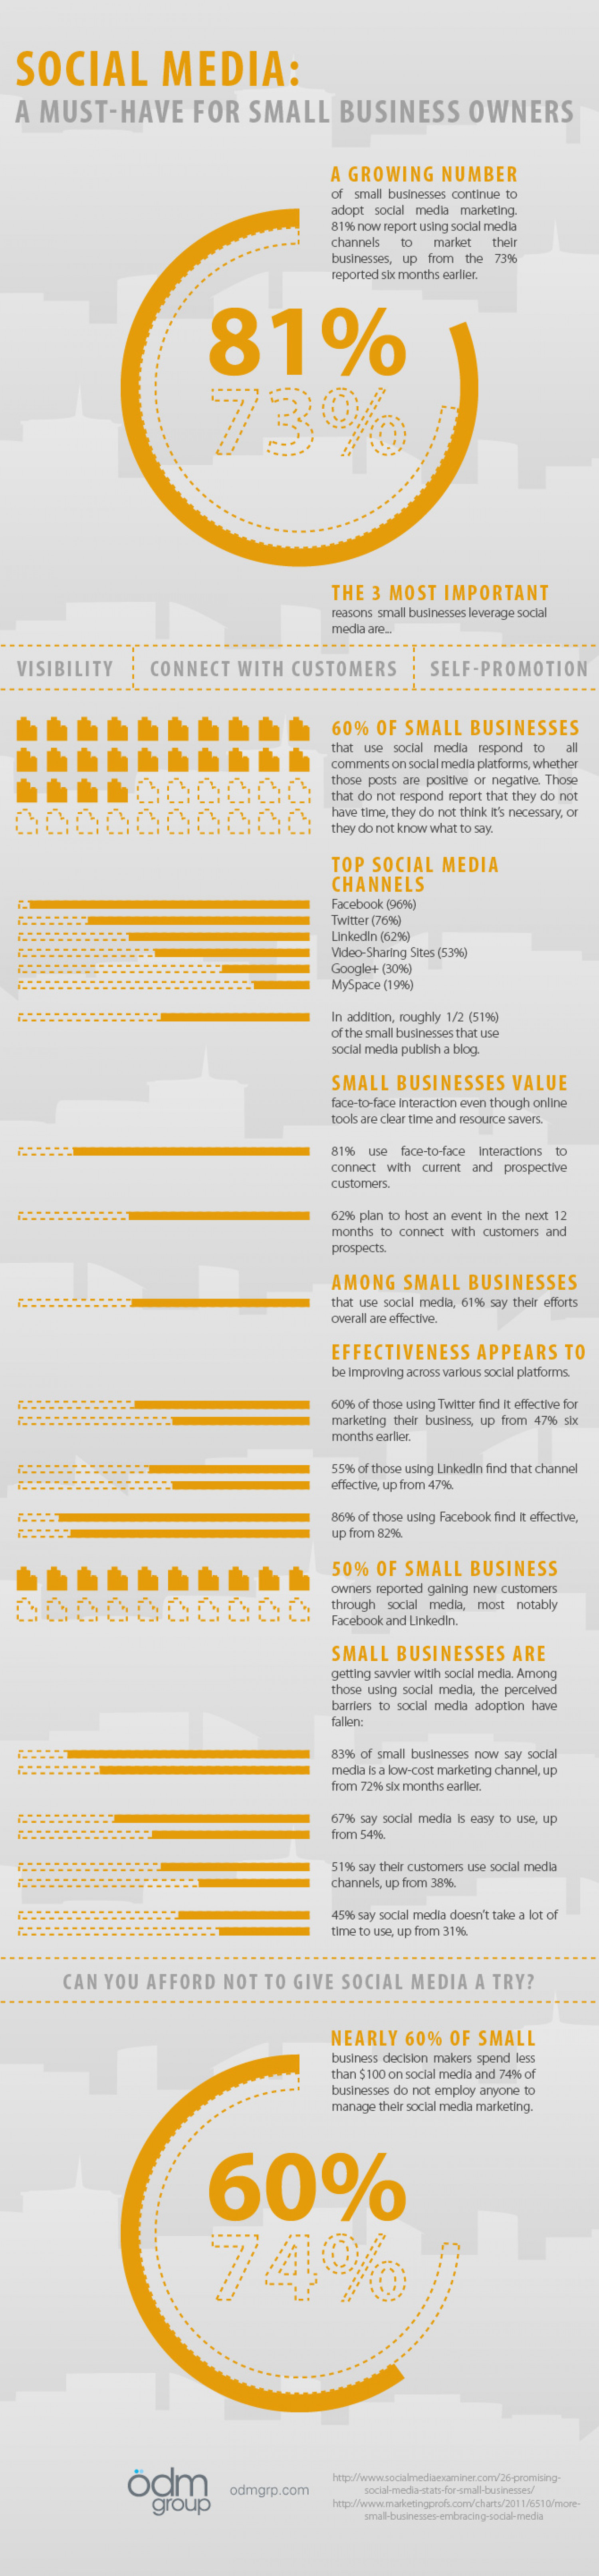 A Must-Have for Small Business Owners Infographic